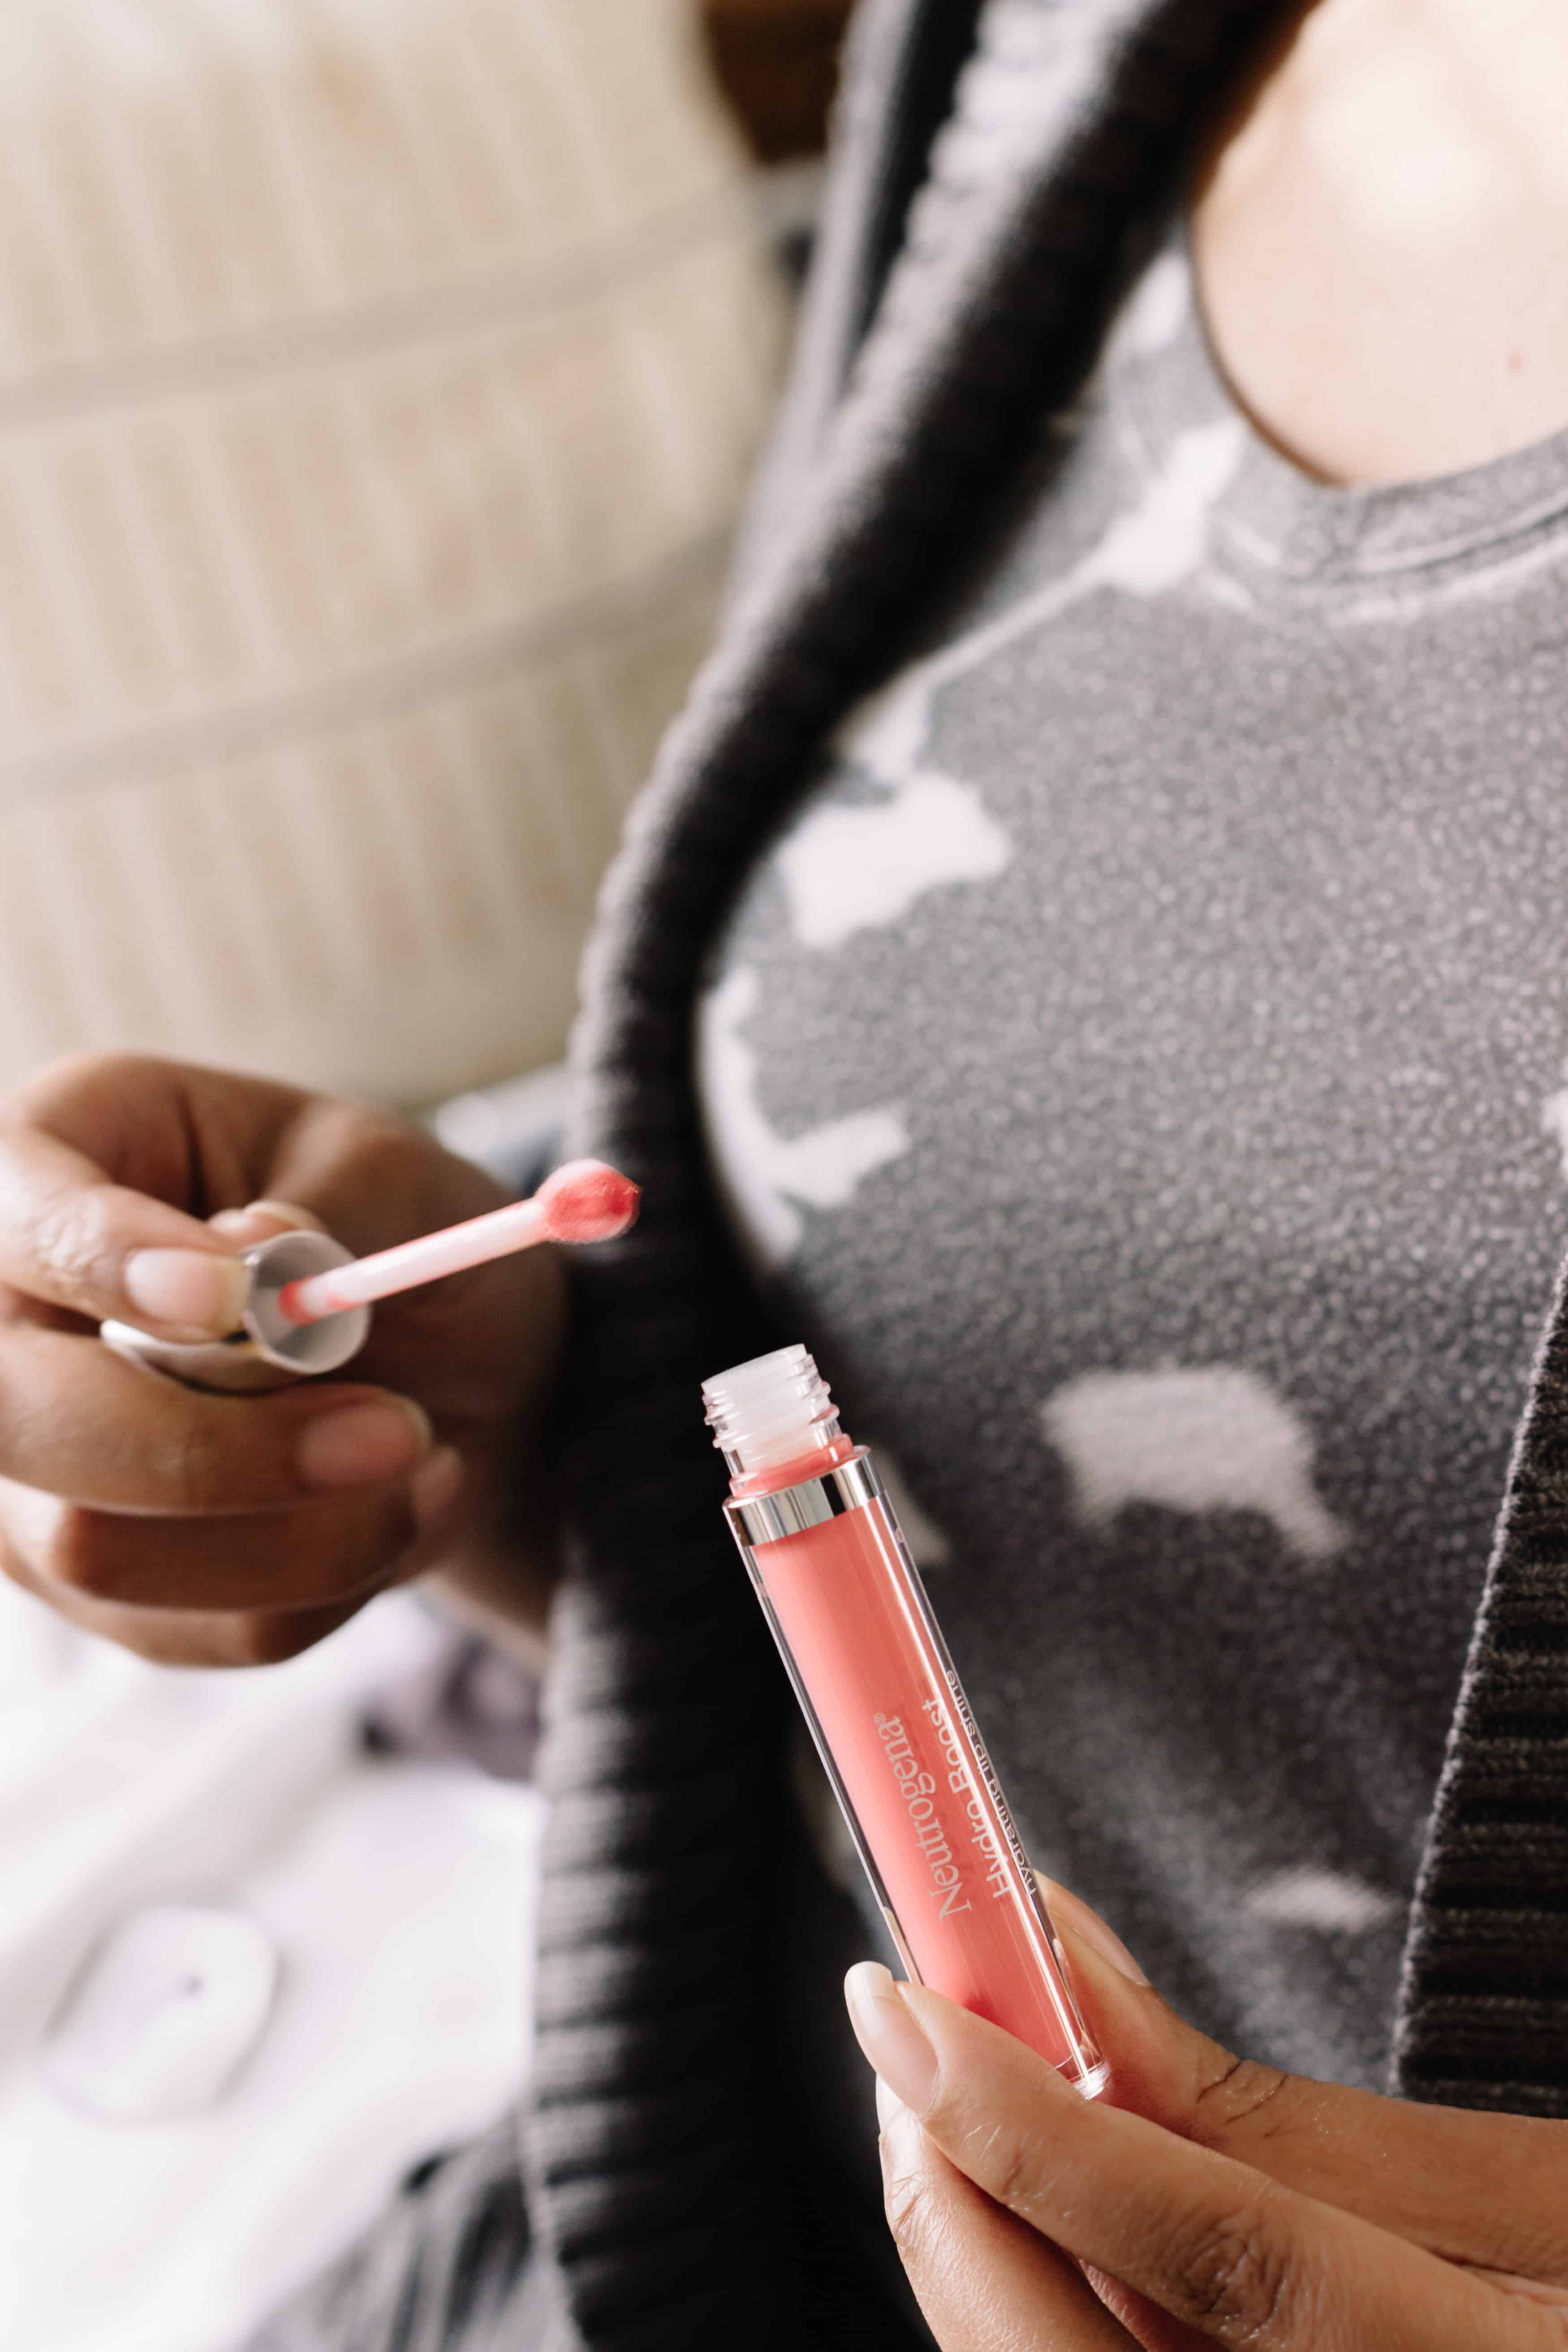 My Go-To Winter Beauty Products For Soft, Pouty Lips // #Ad #NeuYearNeuYou @Neutrogena